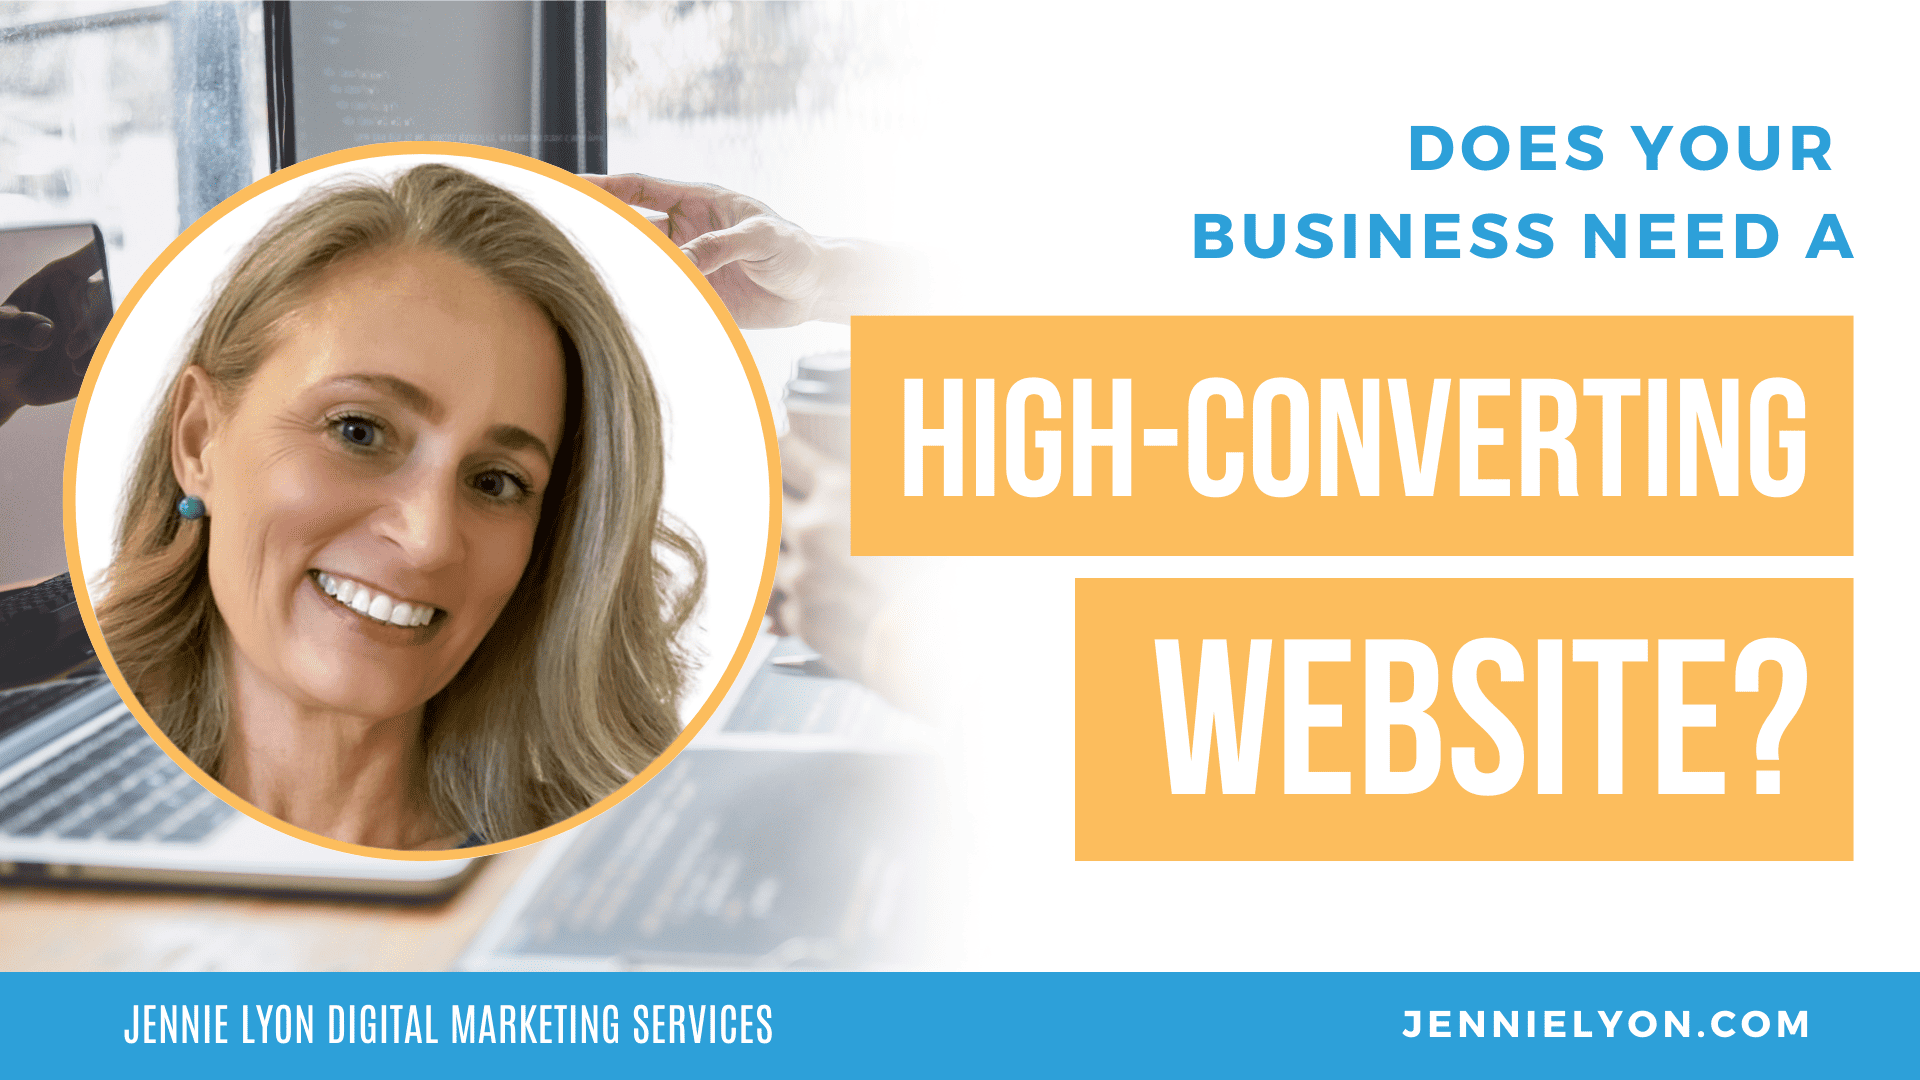 Does Your Business Need A High-Converting Website?